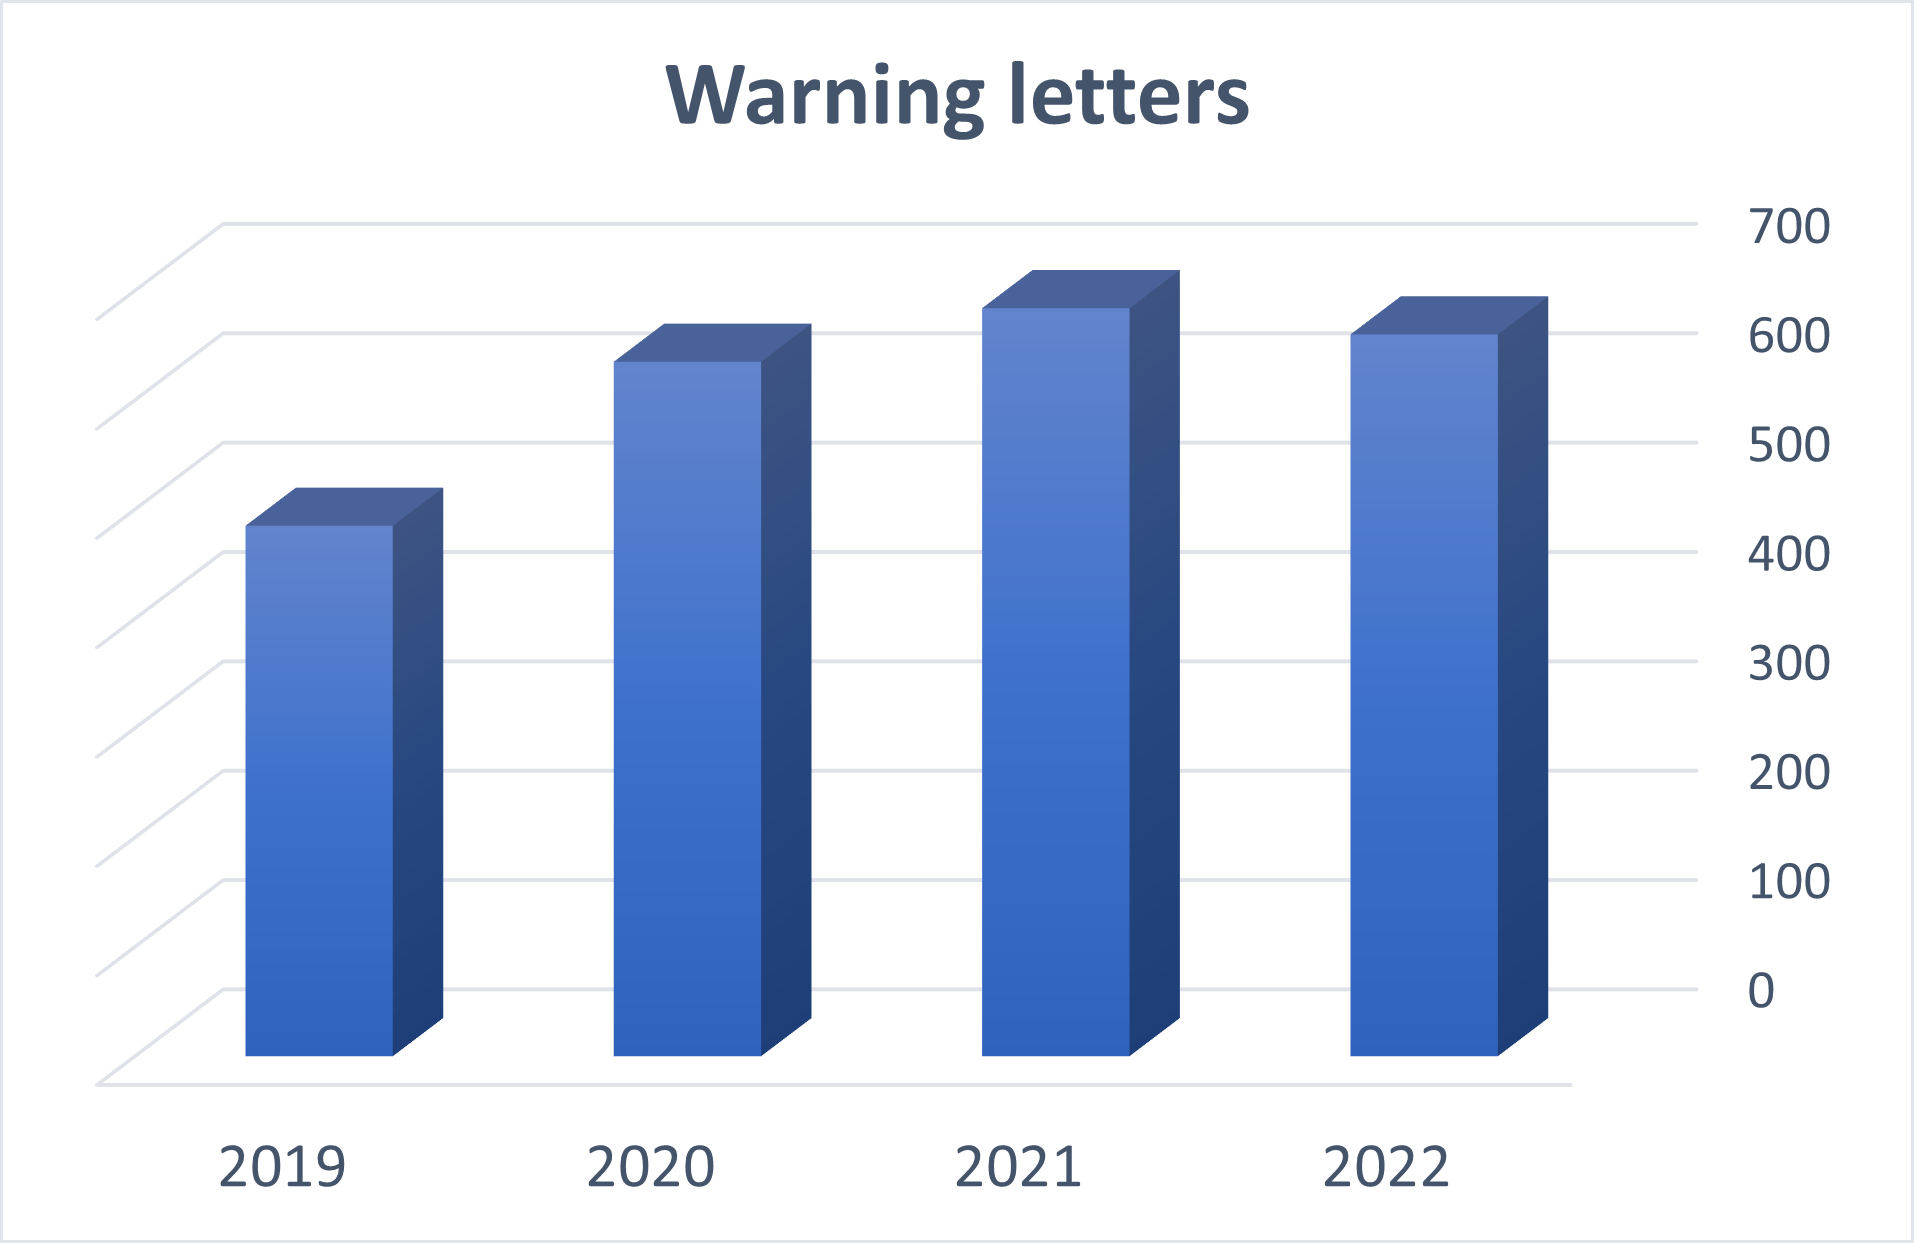 Warning letters per year